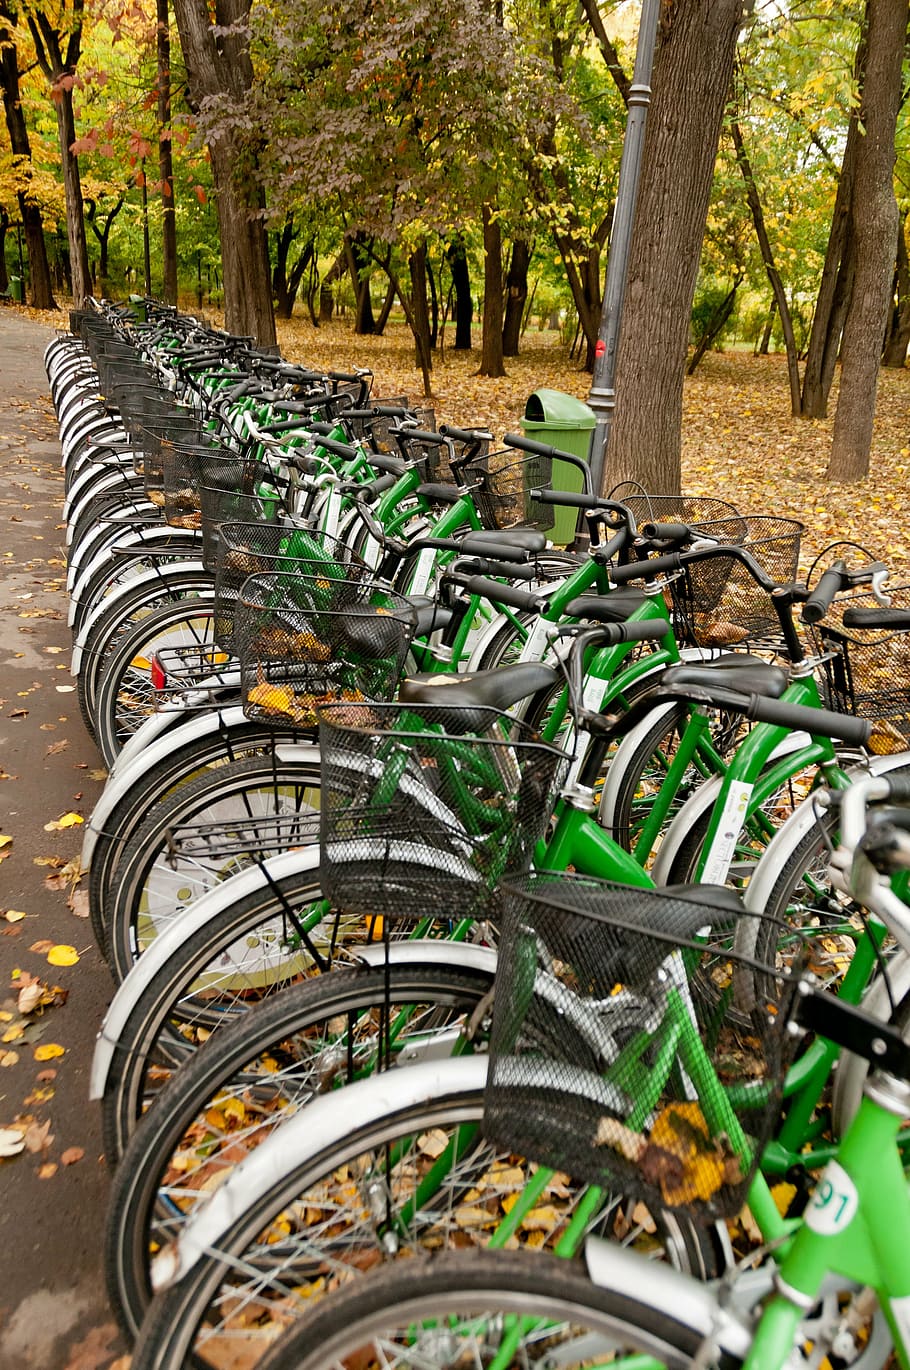 bicycles, rental, cycling, sport, urban, public, row, park, plant, bicycle